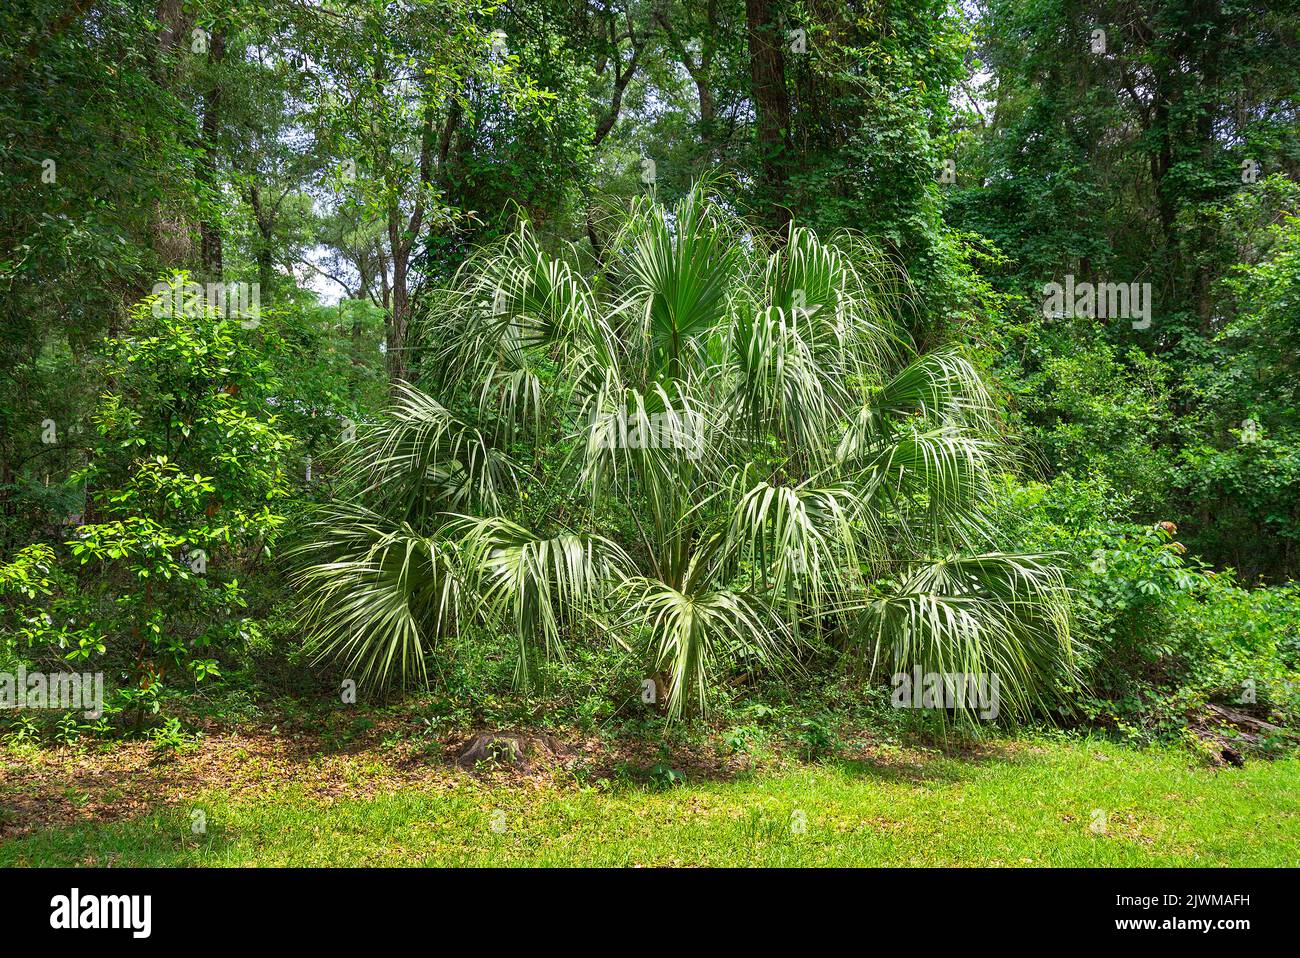 Favorite Sabal Palm Tree in our backyard Ft. White, Florida. Stock Photo